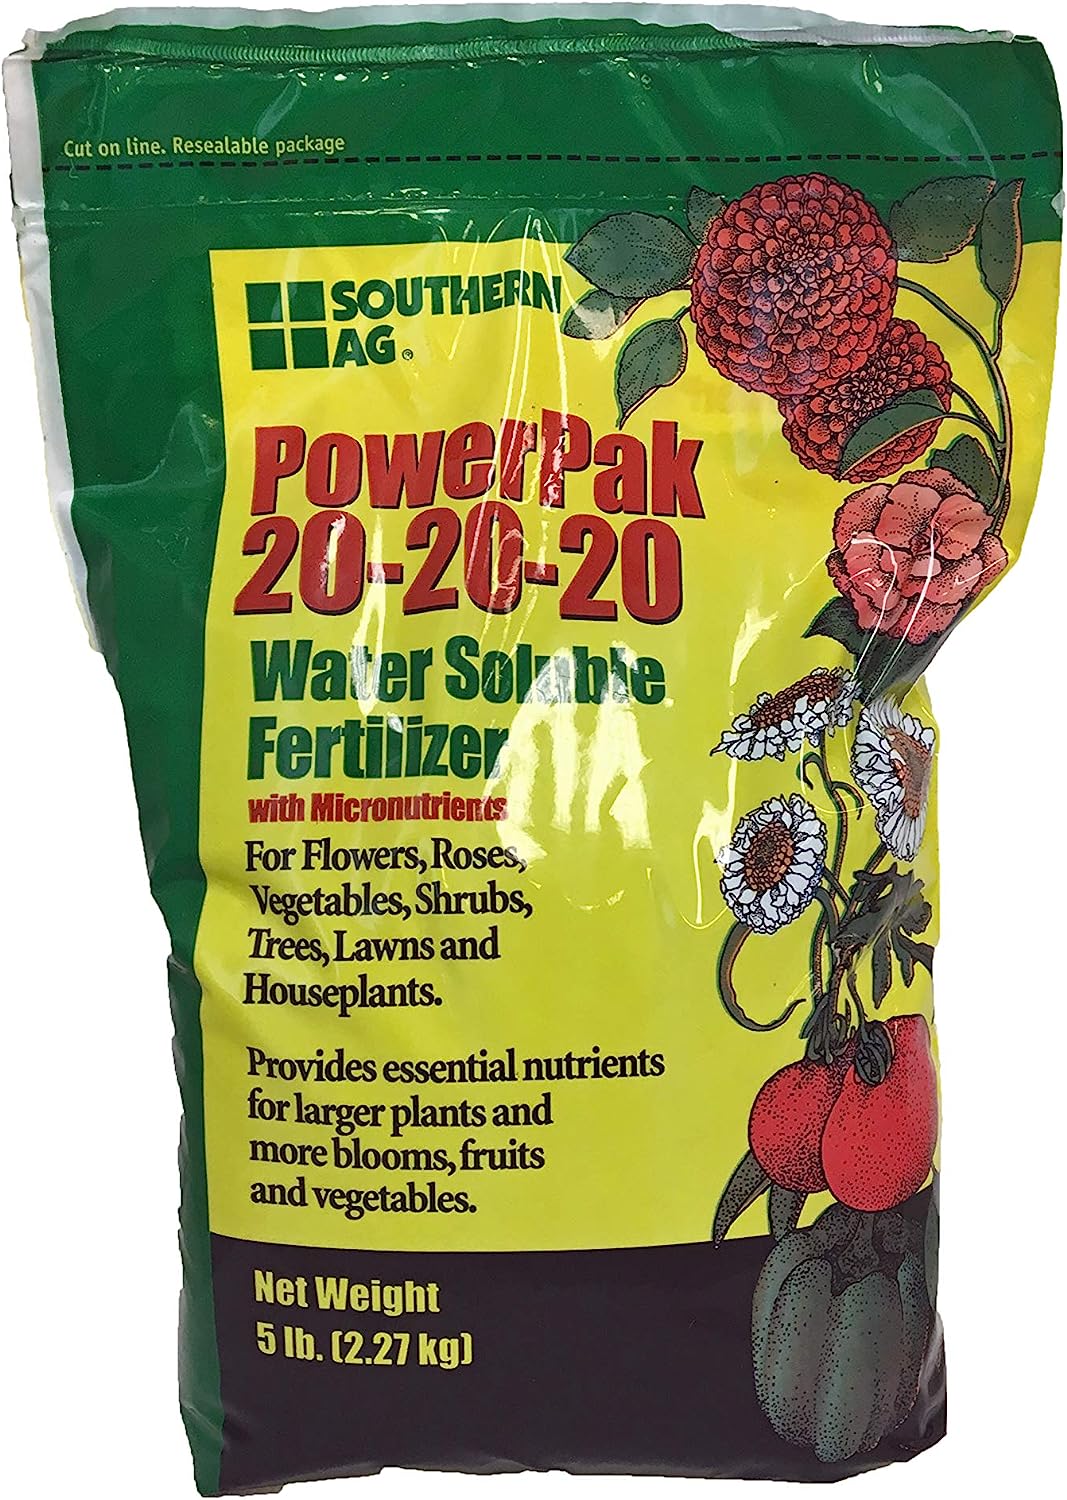 Southern Ag, PowerPak 20-20-20 Water Soluble Fertilizer with micronutrients (5 LB)